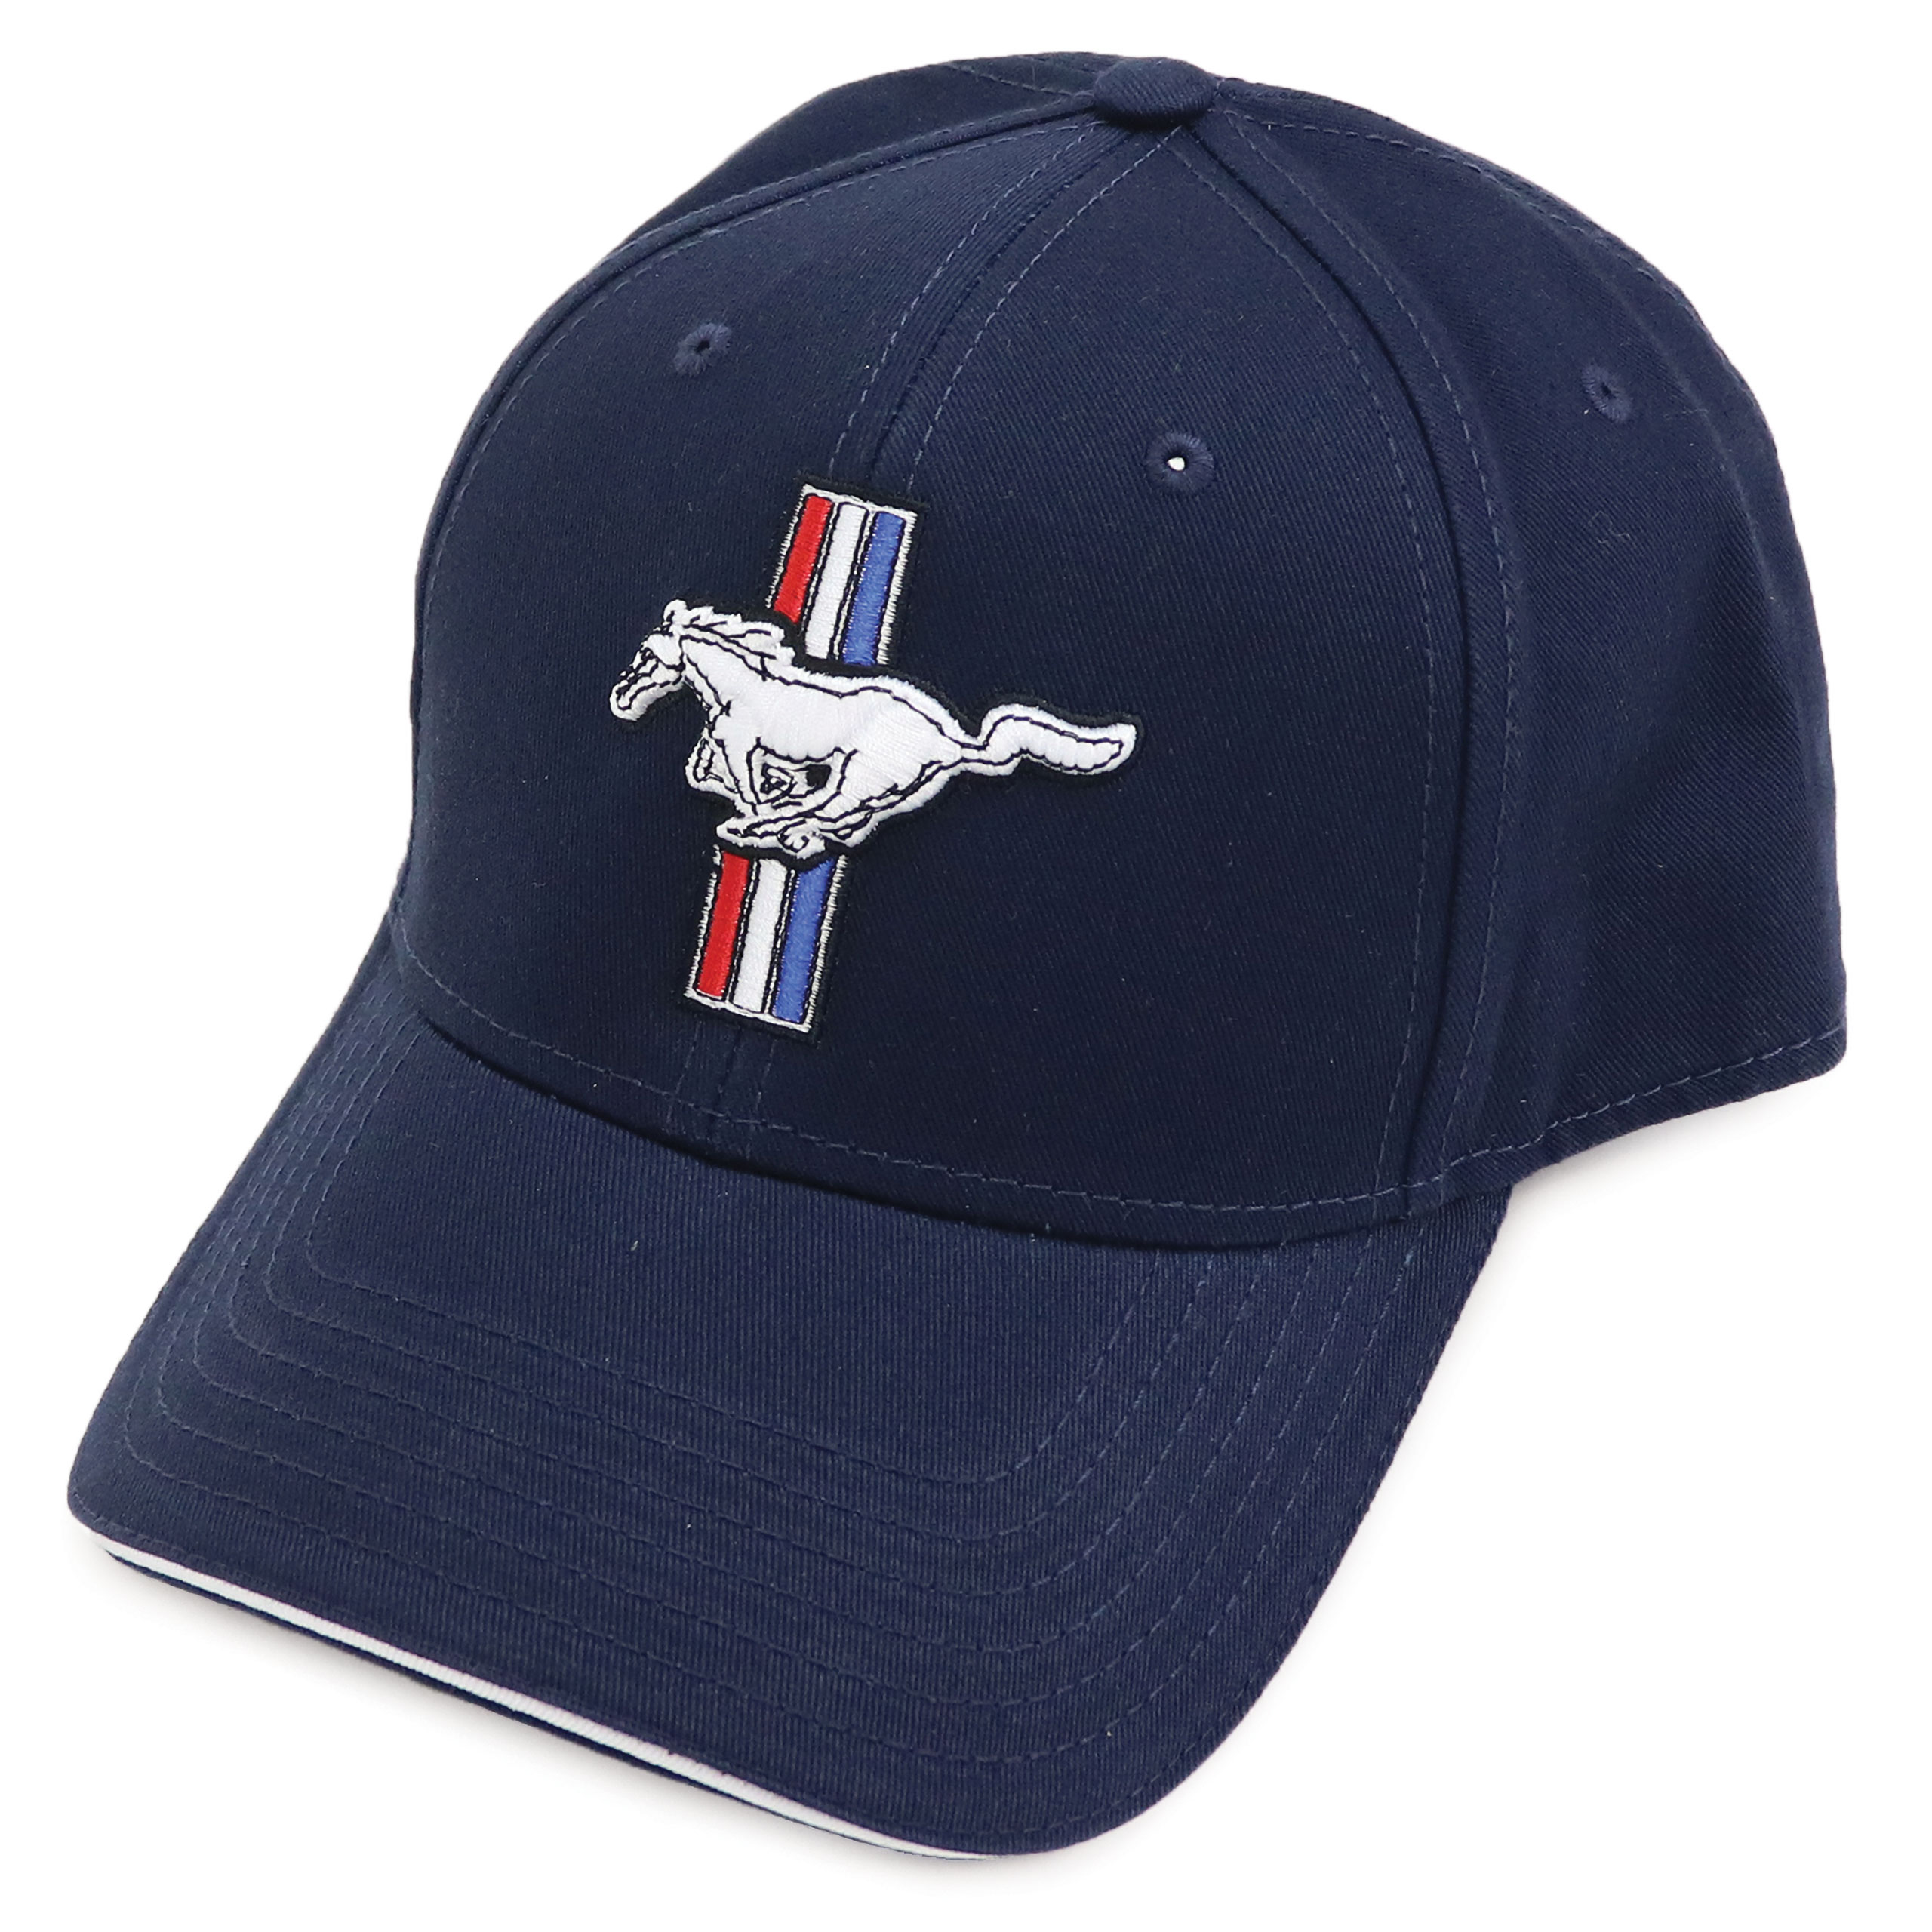 1964-2021 Ford Mustang Cap - of Logo Blue Auto Twill Mustang America - Cotton W/Pony Accessories